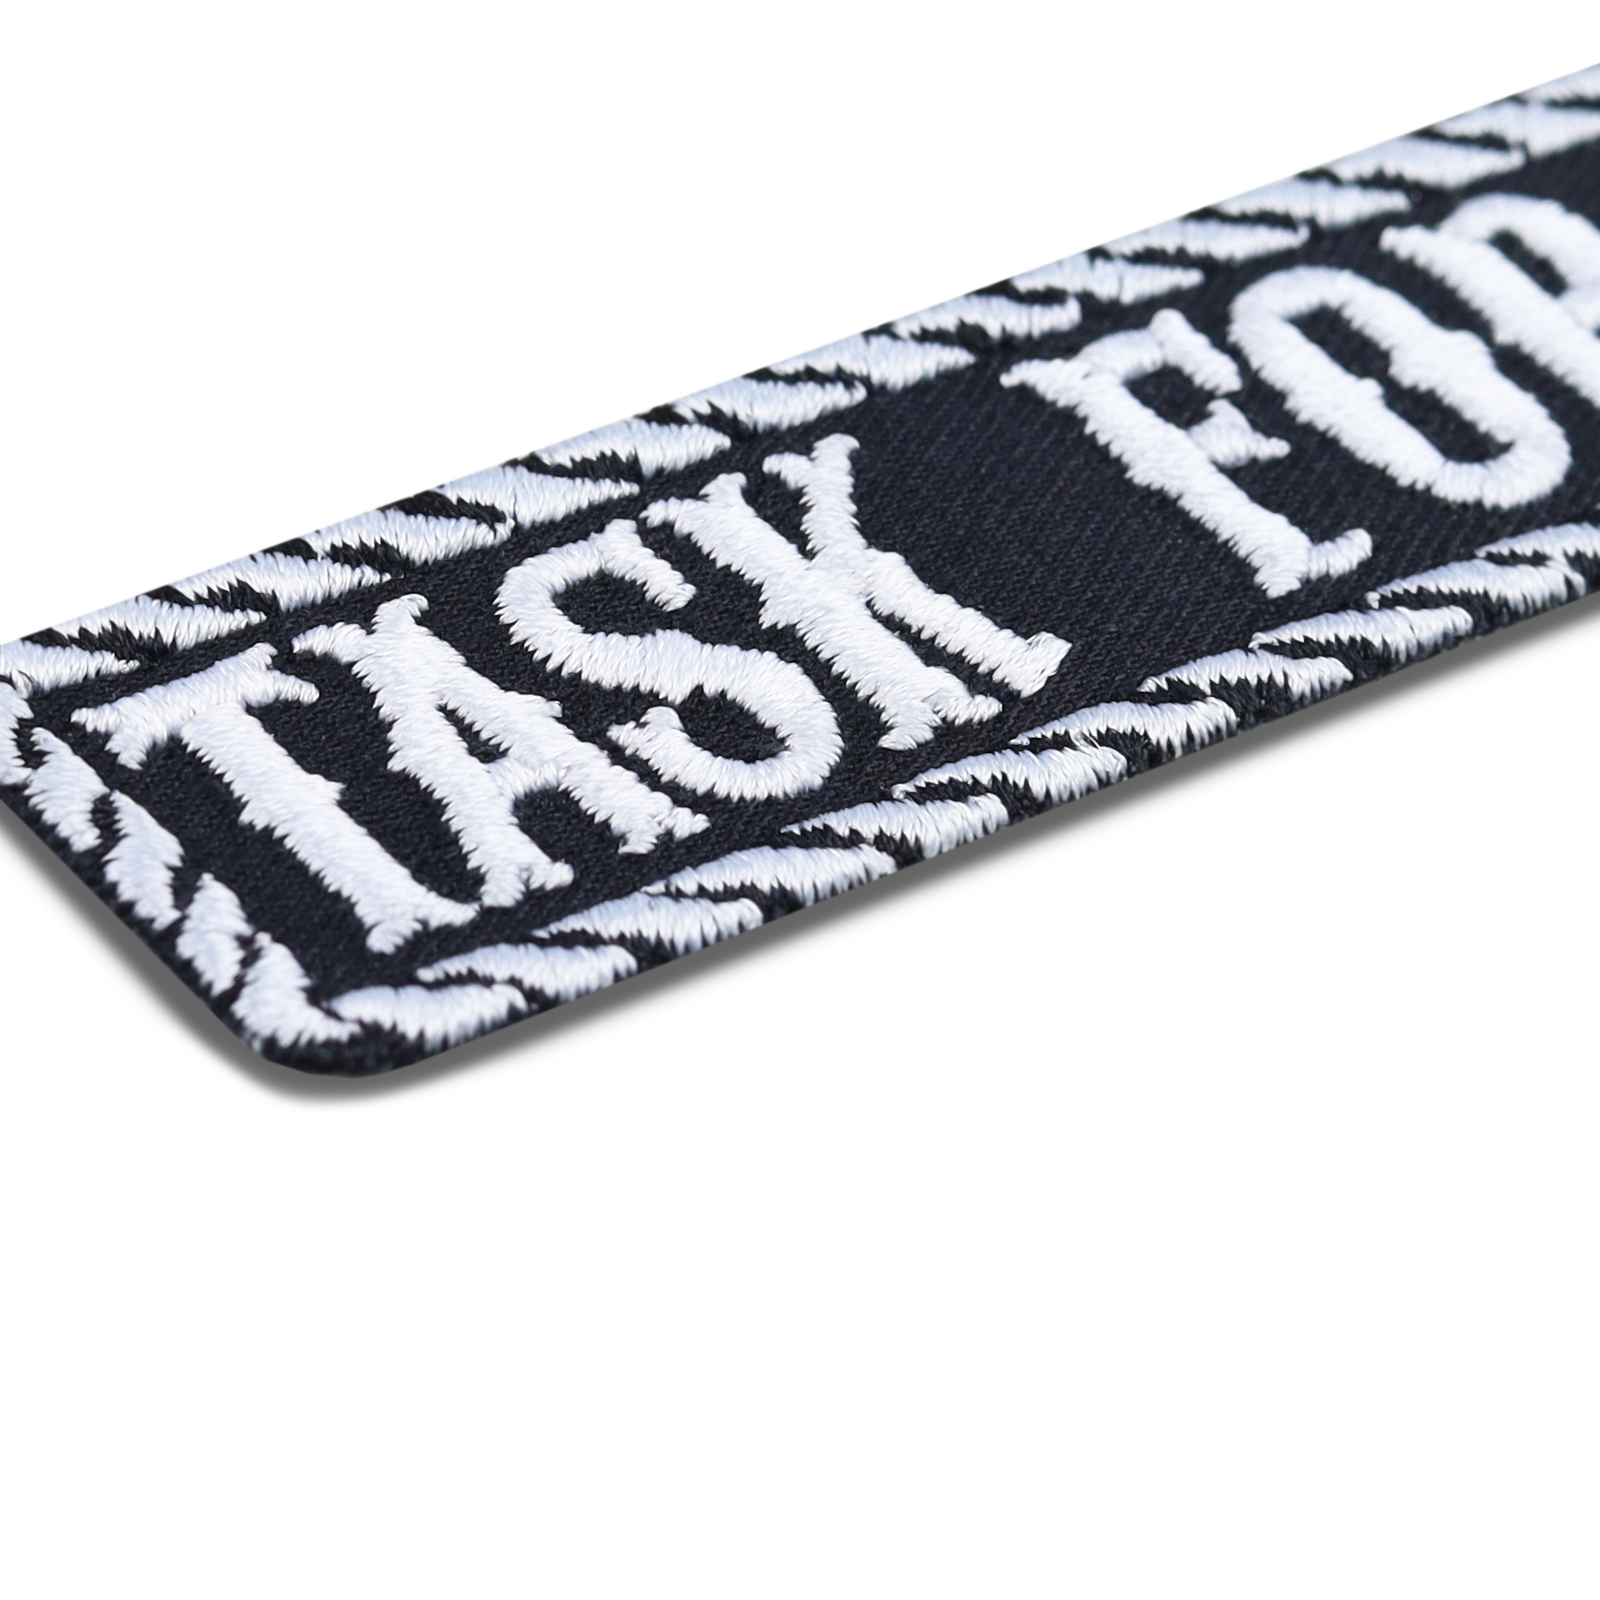 Task force - Patch